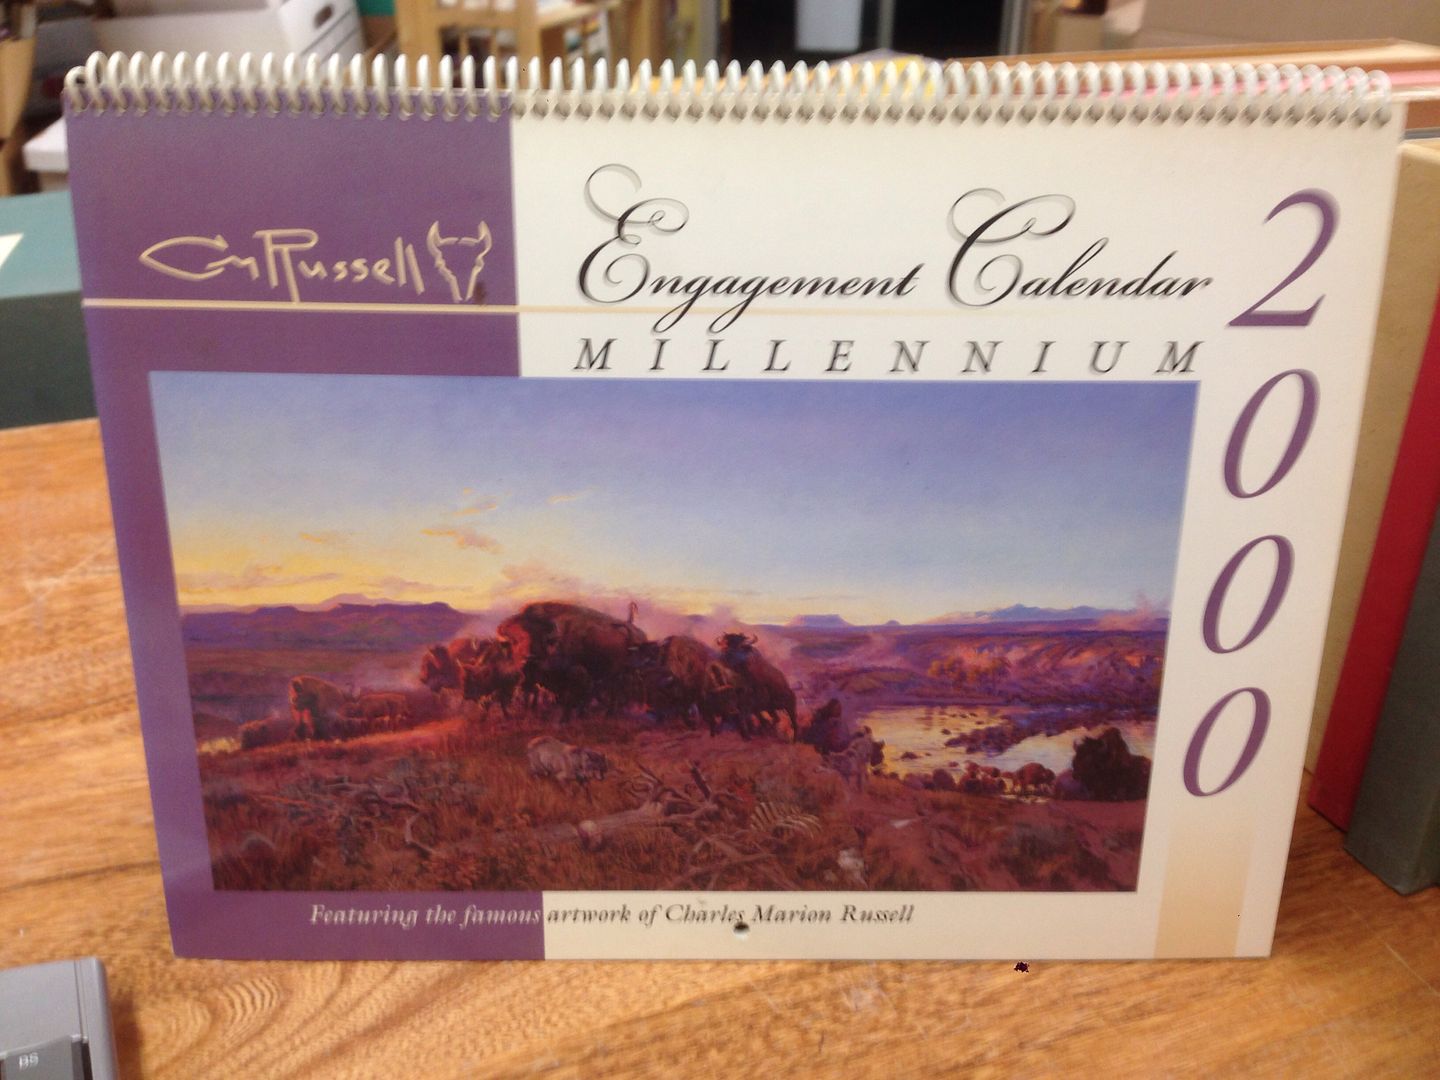 Image for C. M. Russell 2000 Engagement Calendar (Featuring the famous artwork of Charles Marion Russell)